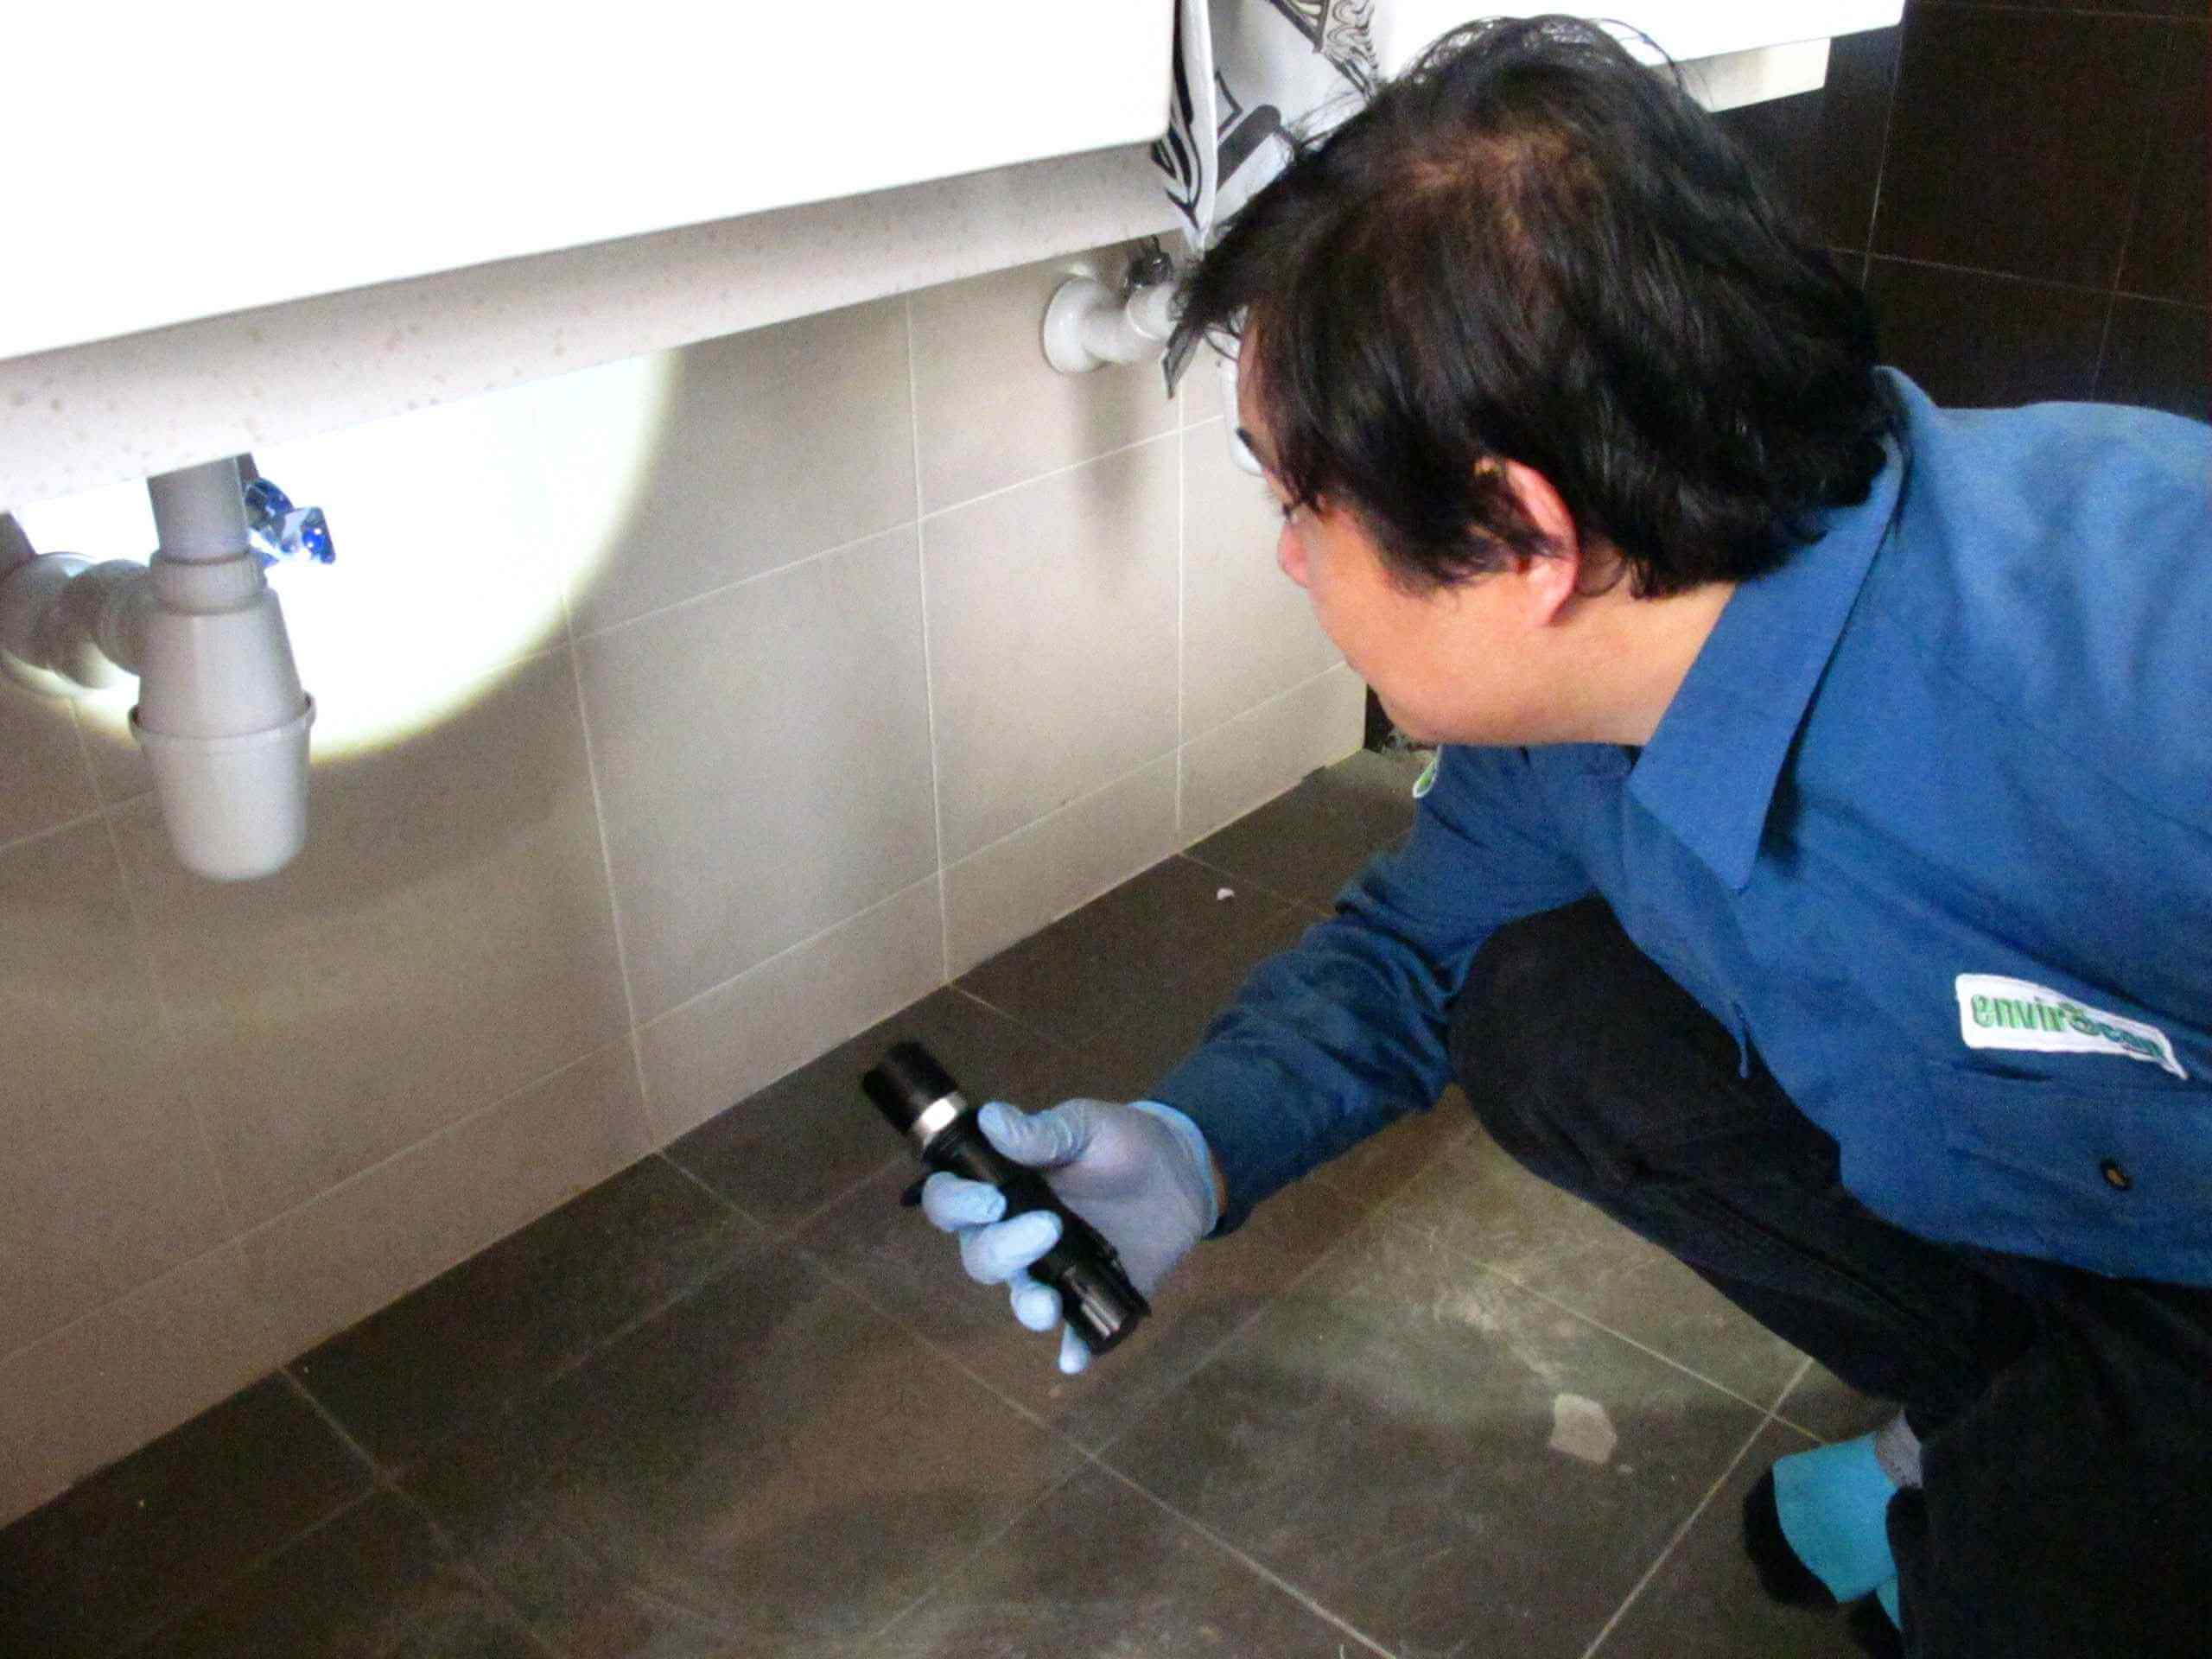 A man with a black torch light is inspecting the area during cockroach pest control treatment.